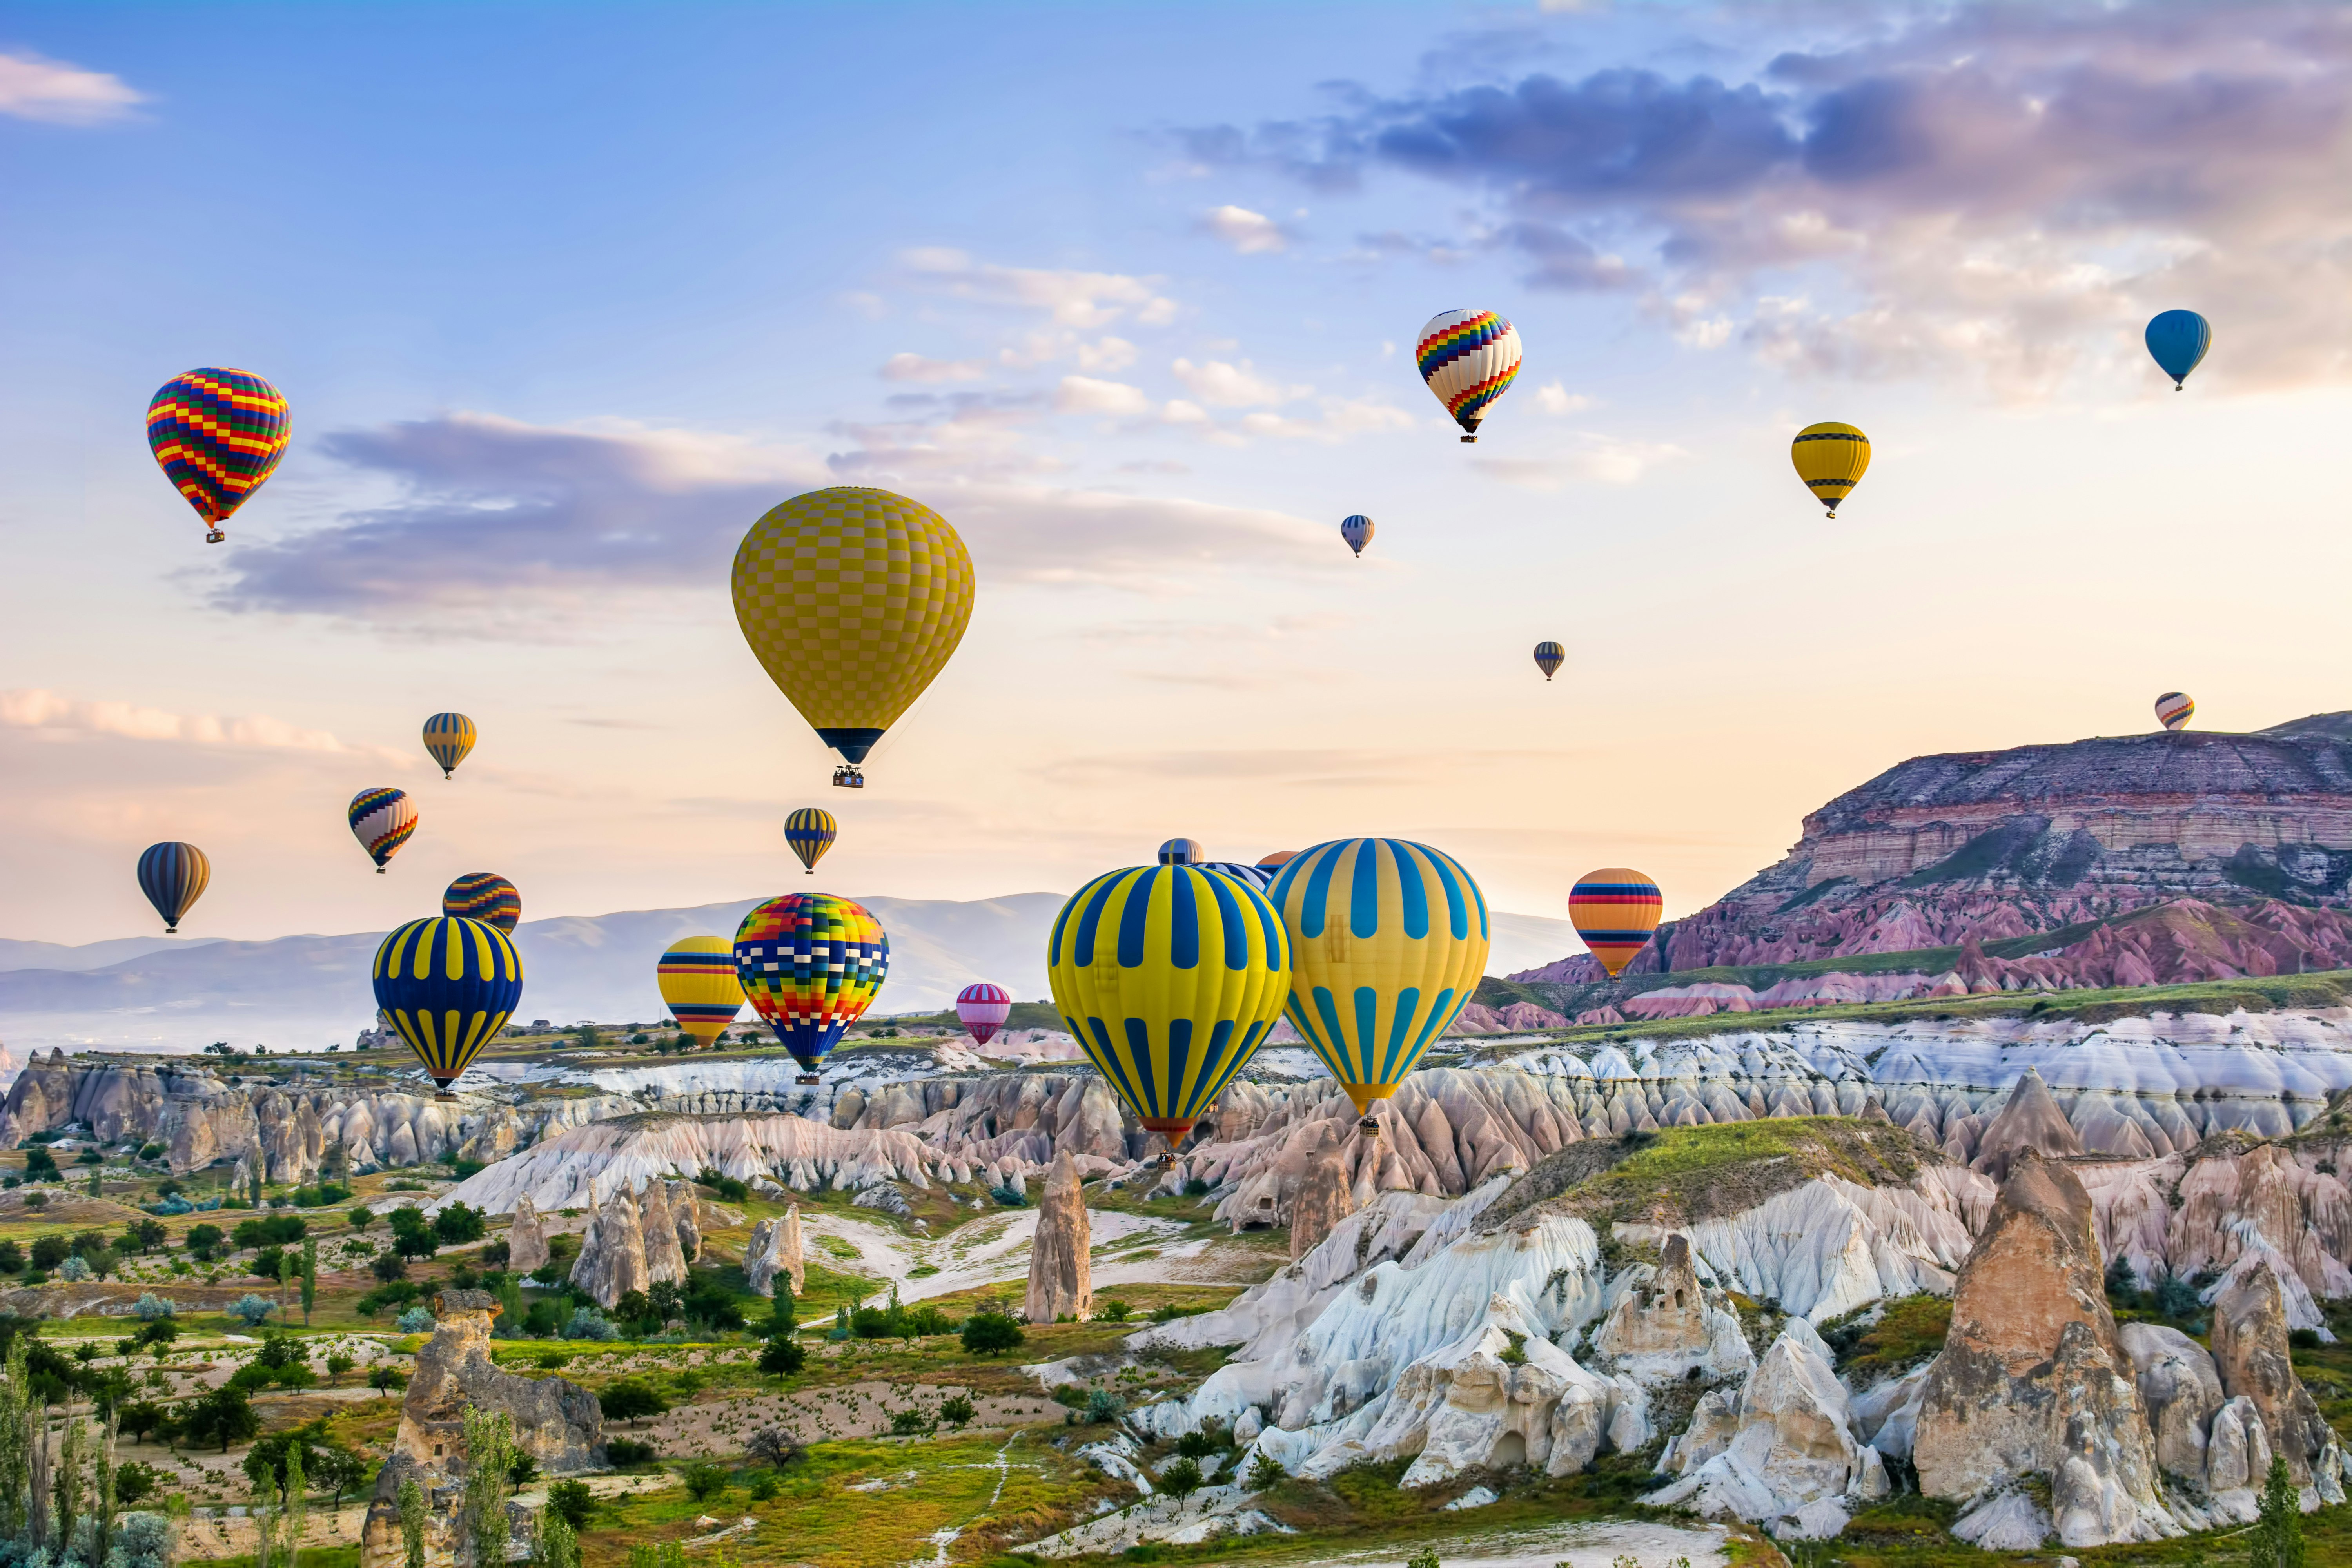 Brightly coloured hot-air balloons float in the air in Cappadocia, Turkey. Mountains are visible in the background.